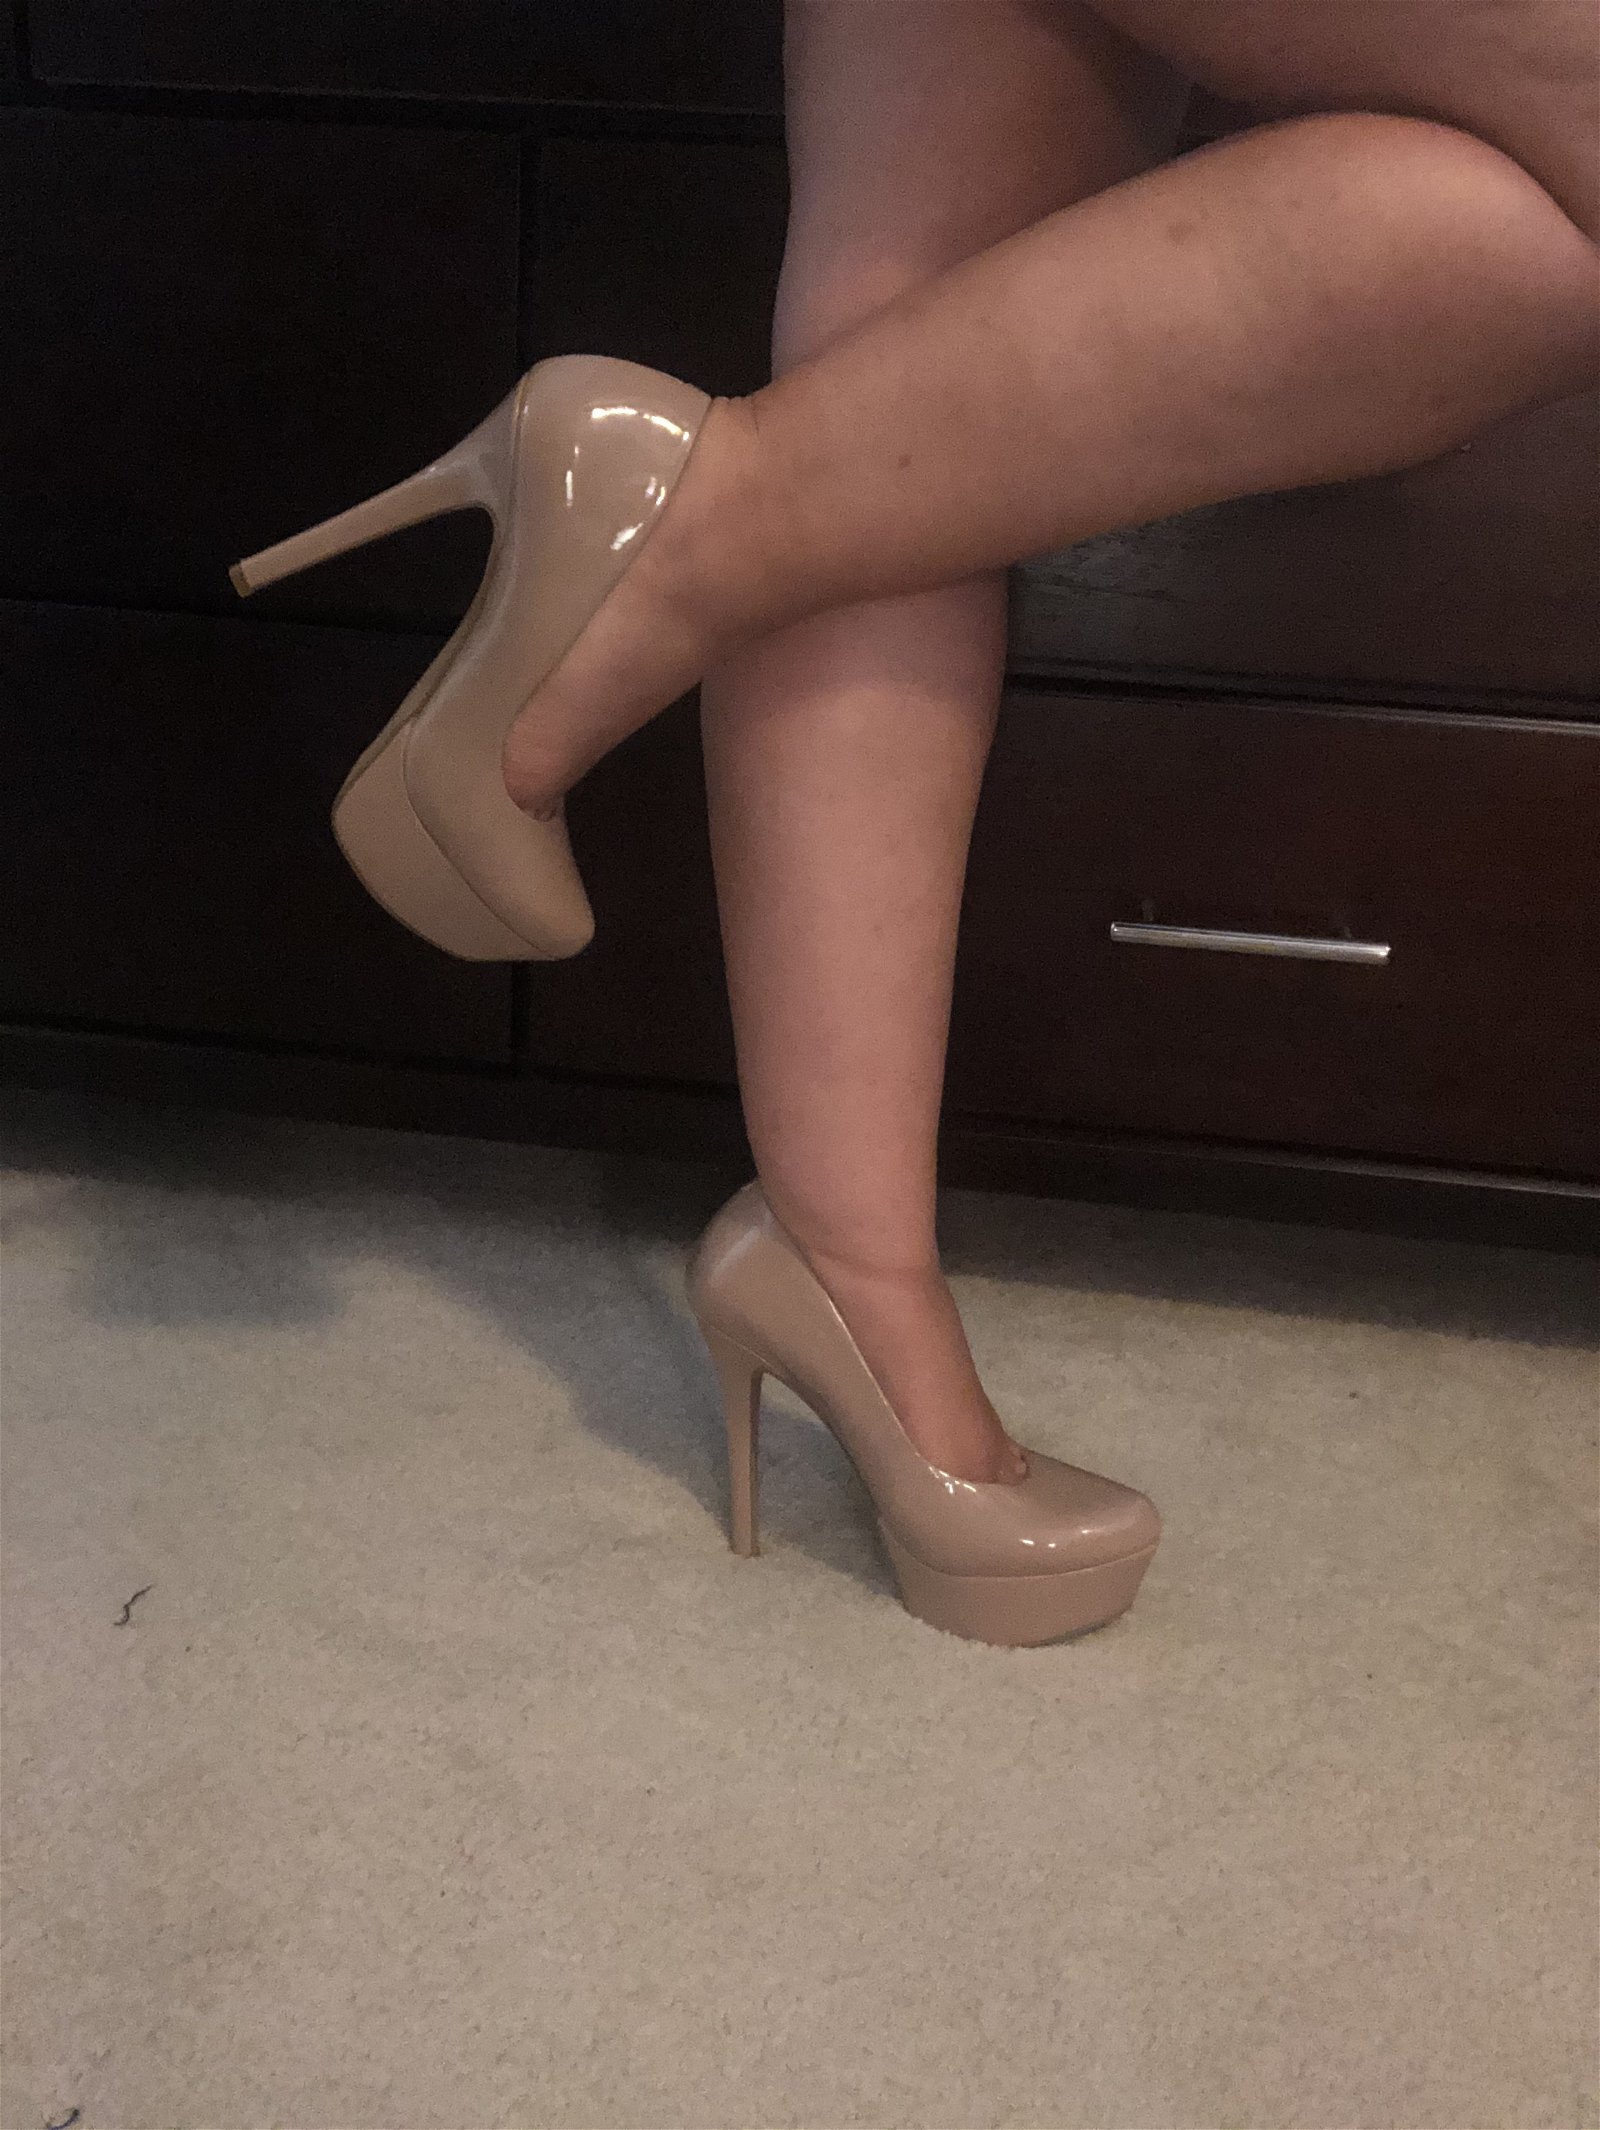 Photo by Mistress Brie with the username @themistressbrie, who is a star user,  July 20, 2020 at 1:30 PM. The post is about the topic Girls with High Heels and the text says 'heel fetish!'